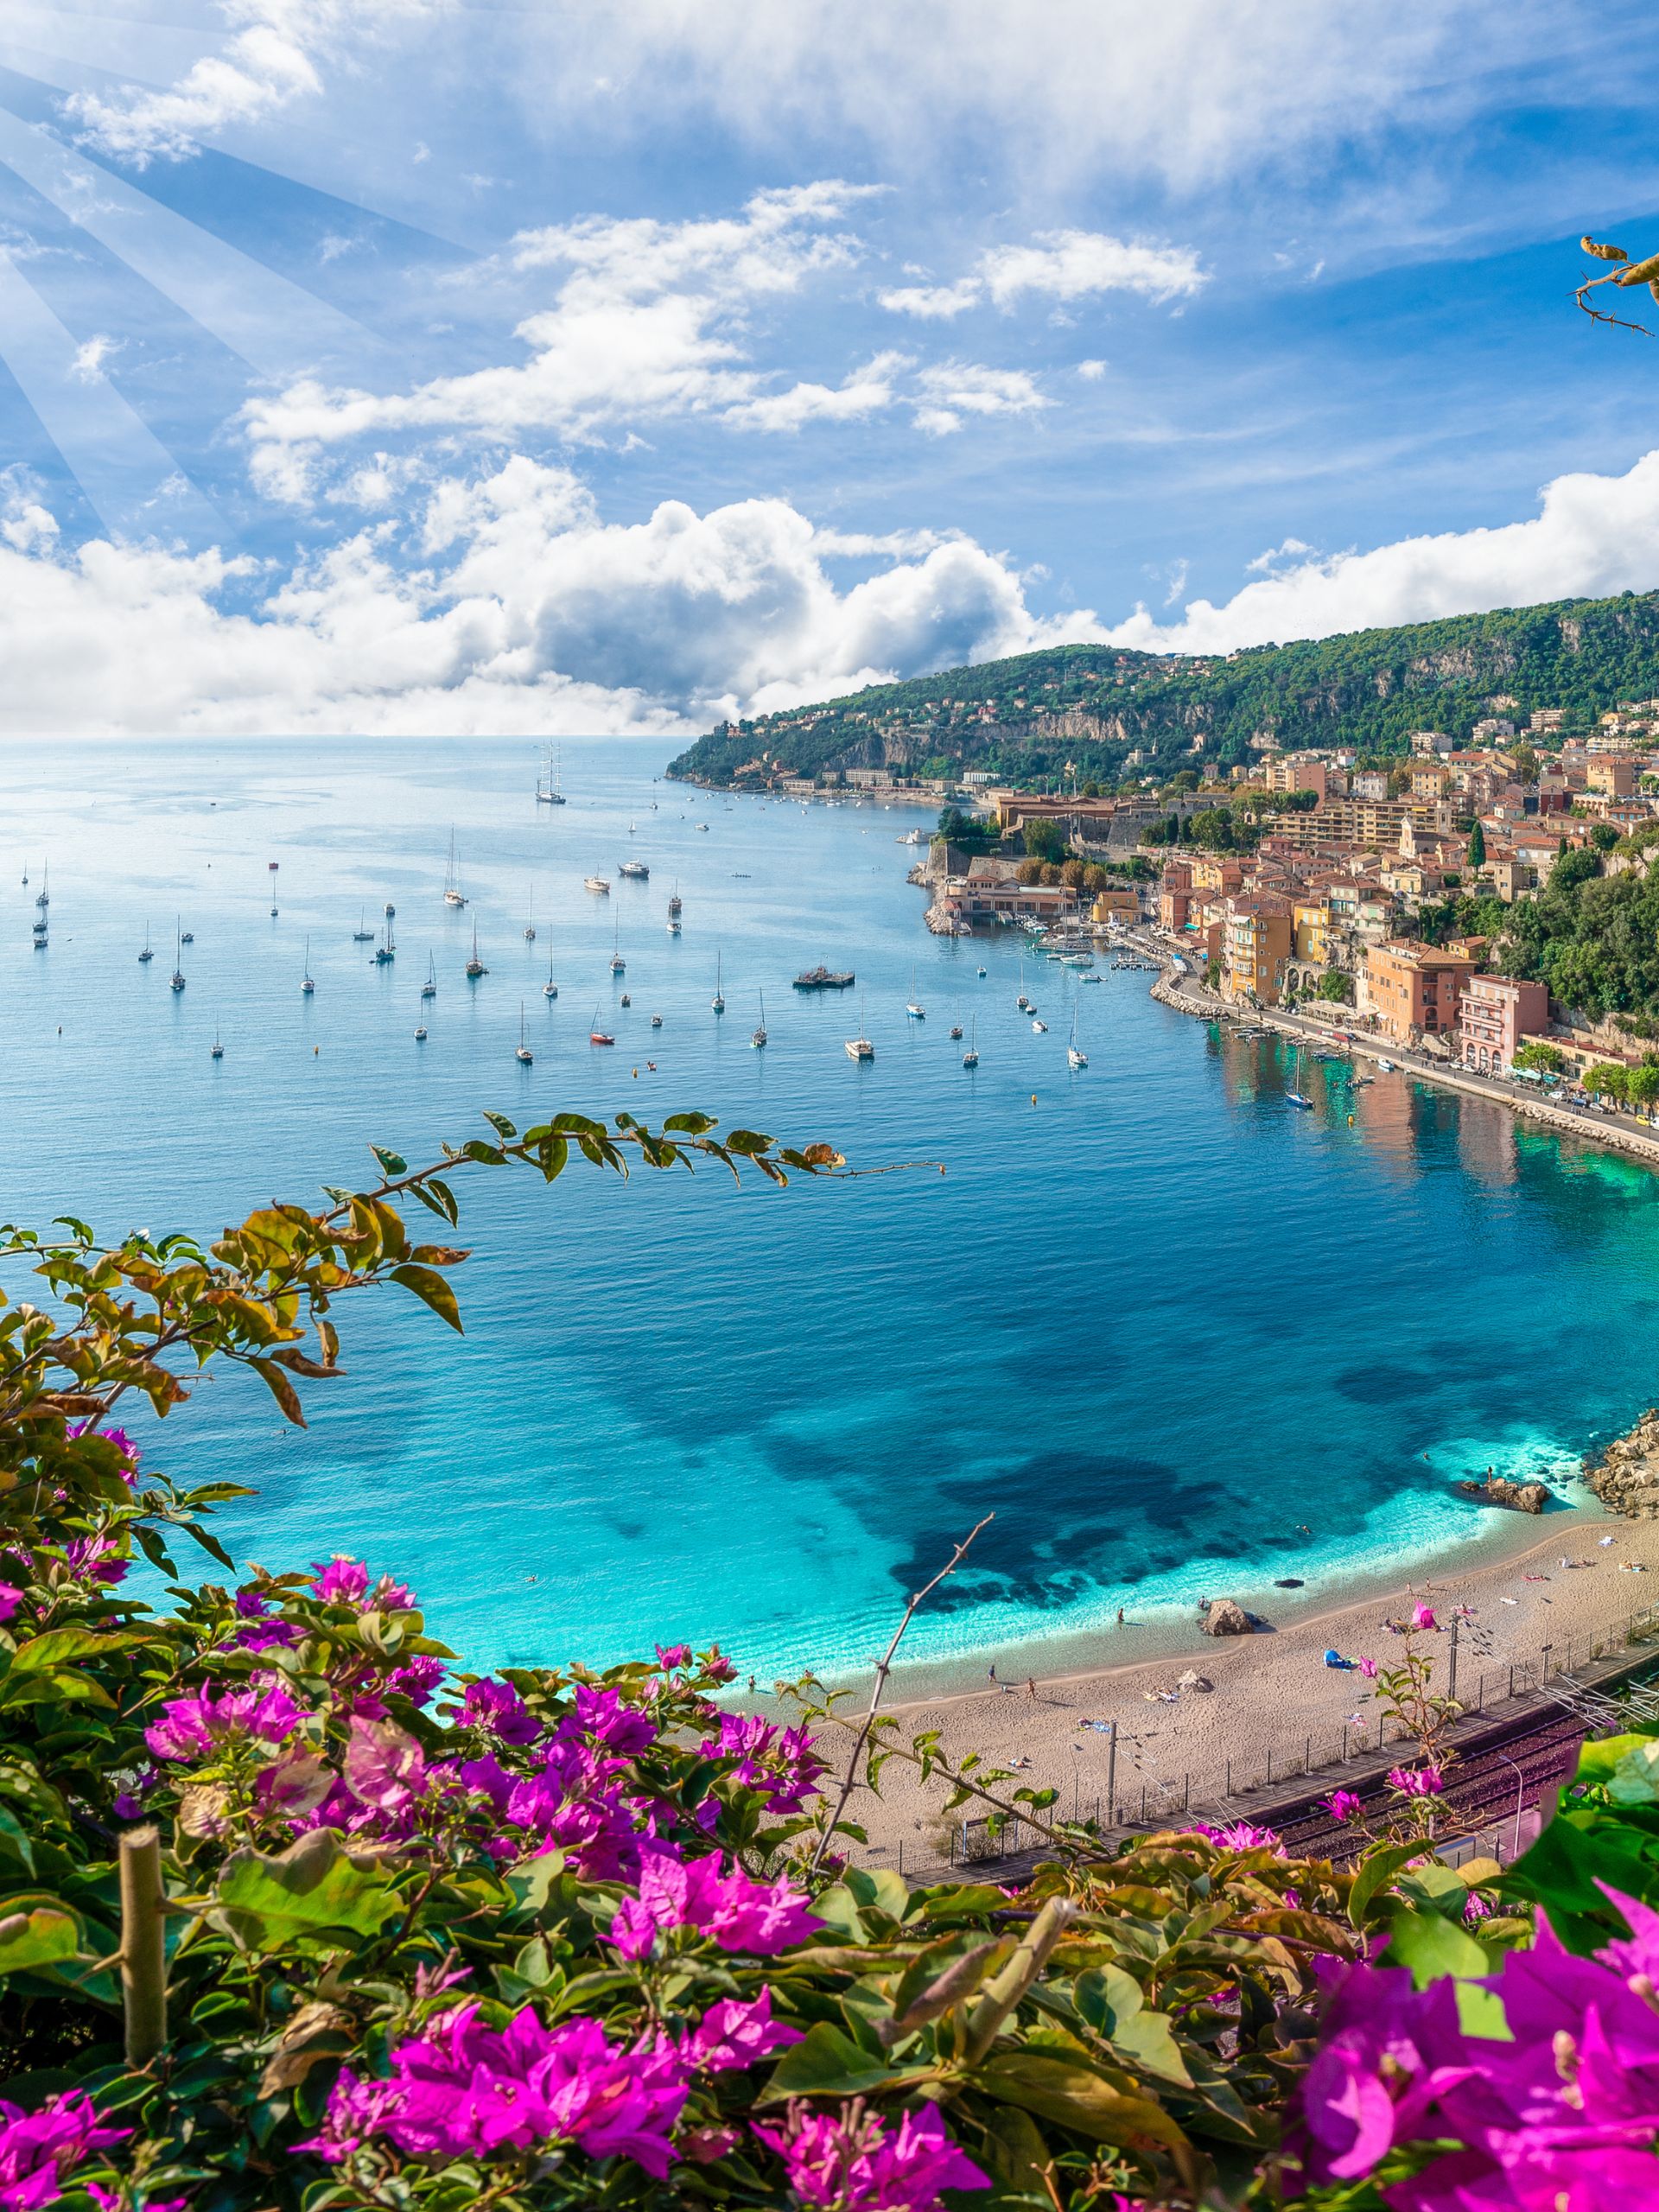 Spring Break Road Trip to the French Riviera